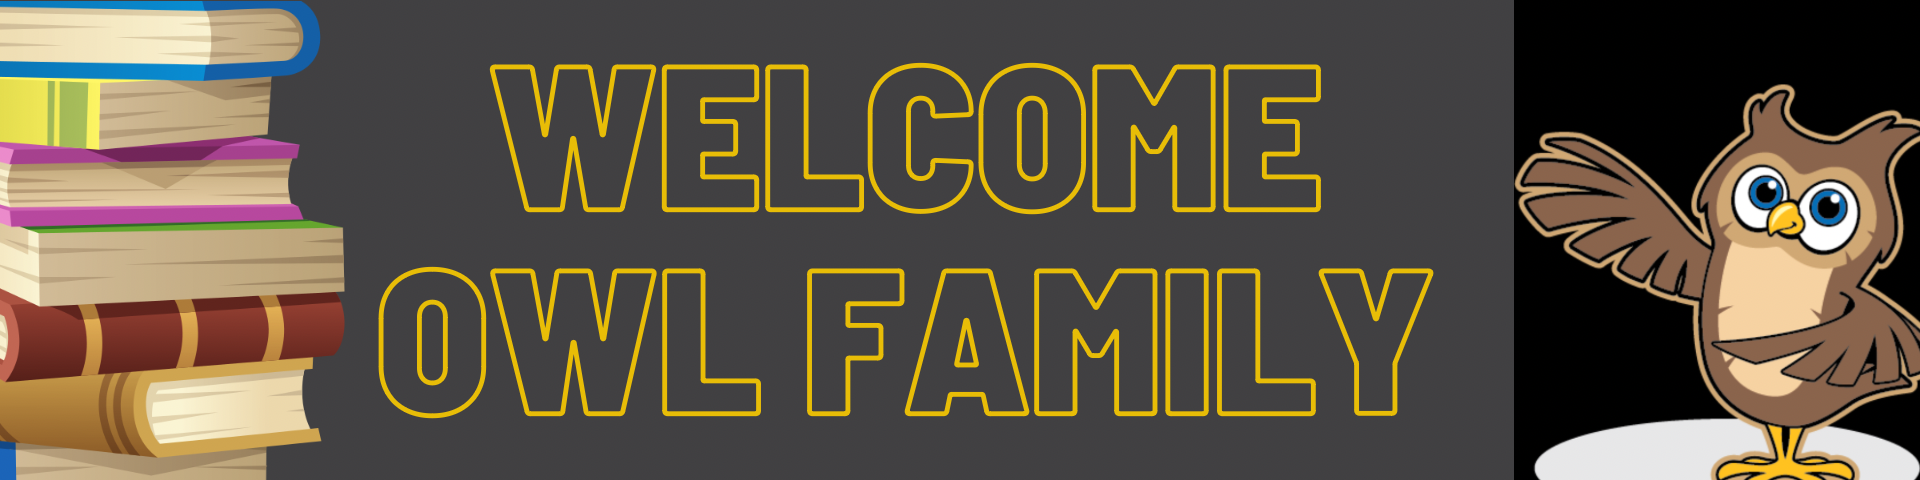 Welcome banner